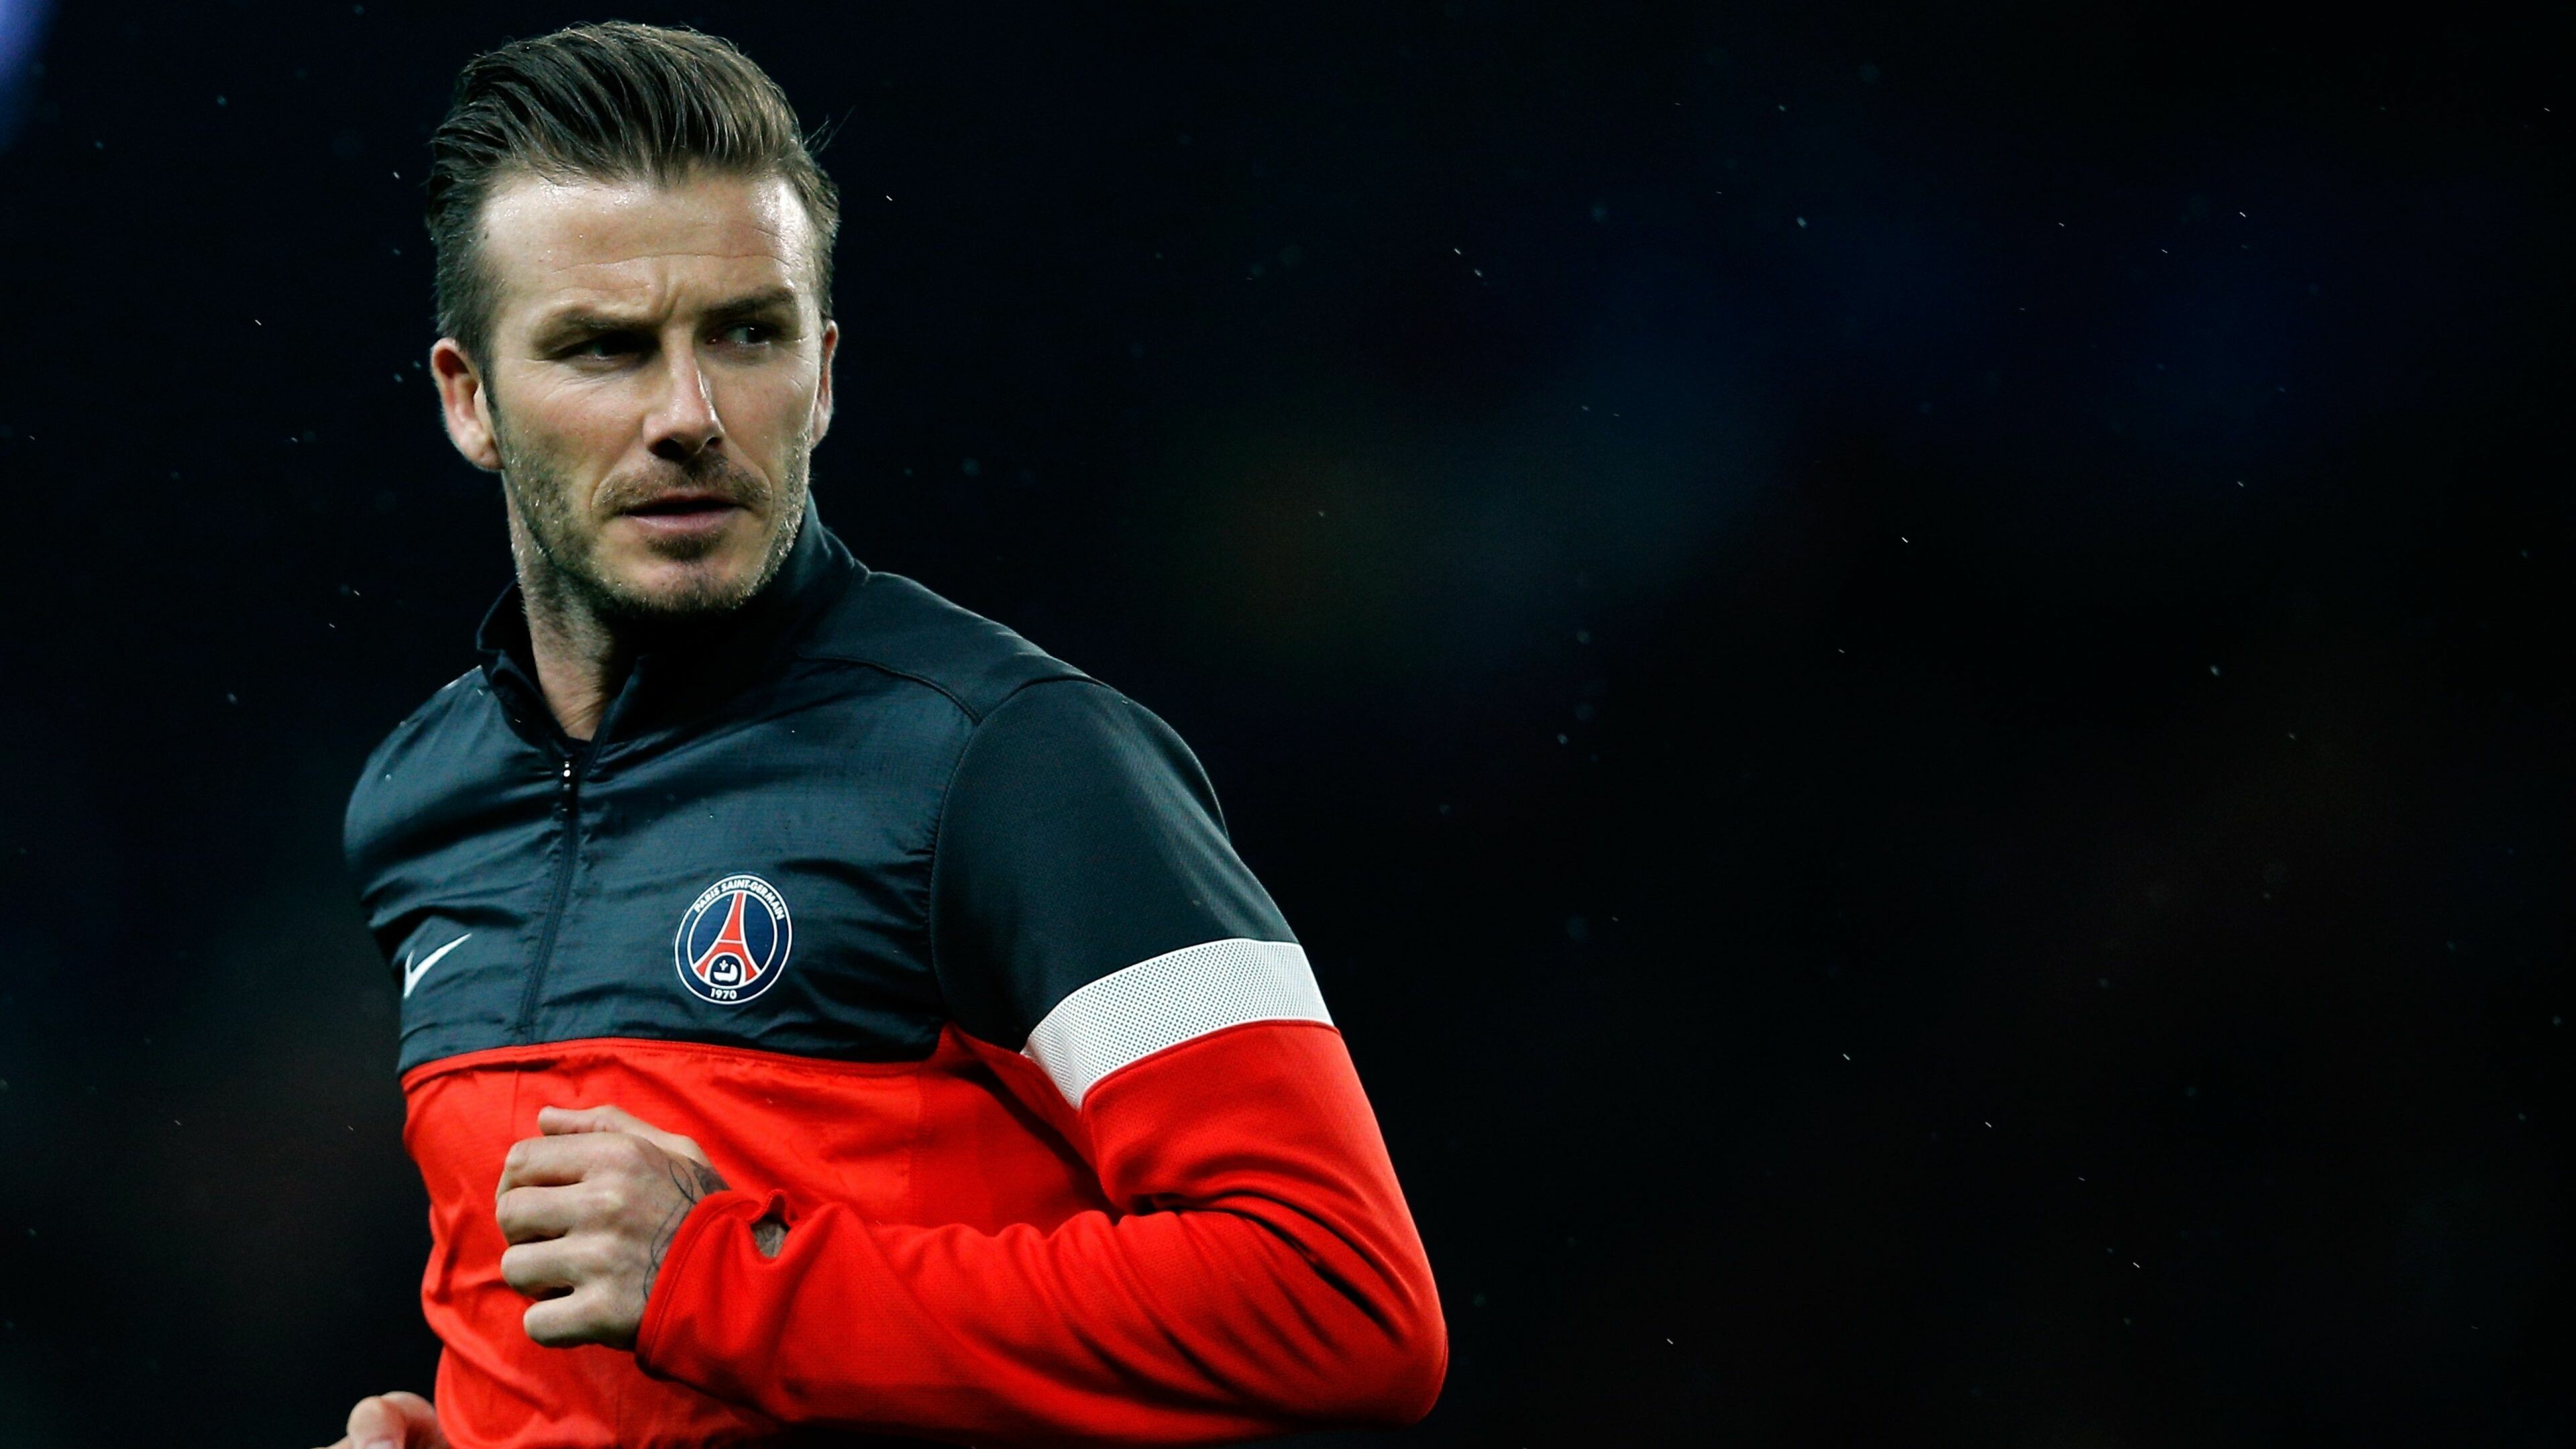 David Beckham: One of the greatest and most recognisable midfielders of his generation. 3840x2160 4K Background.